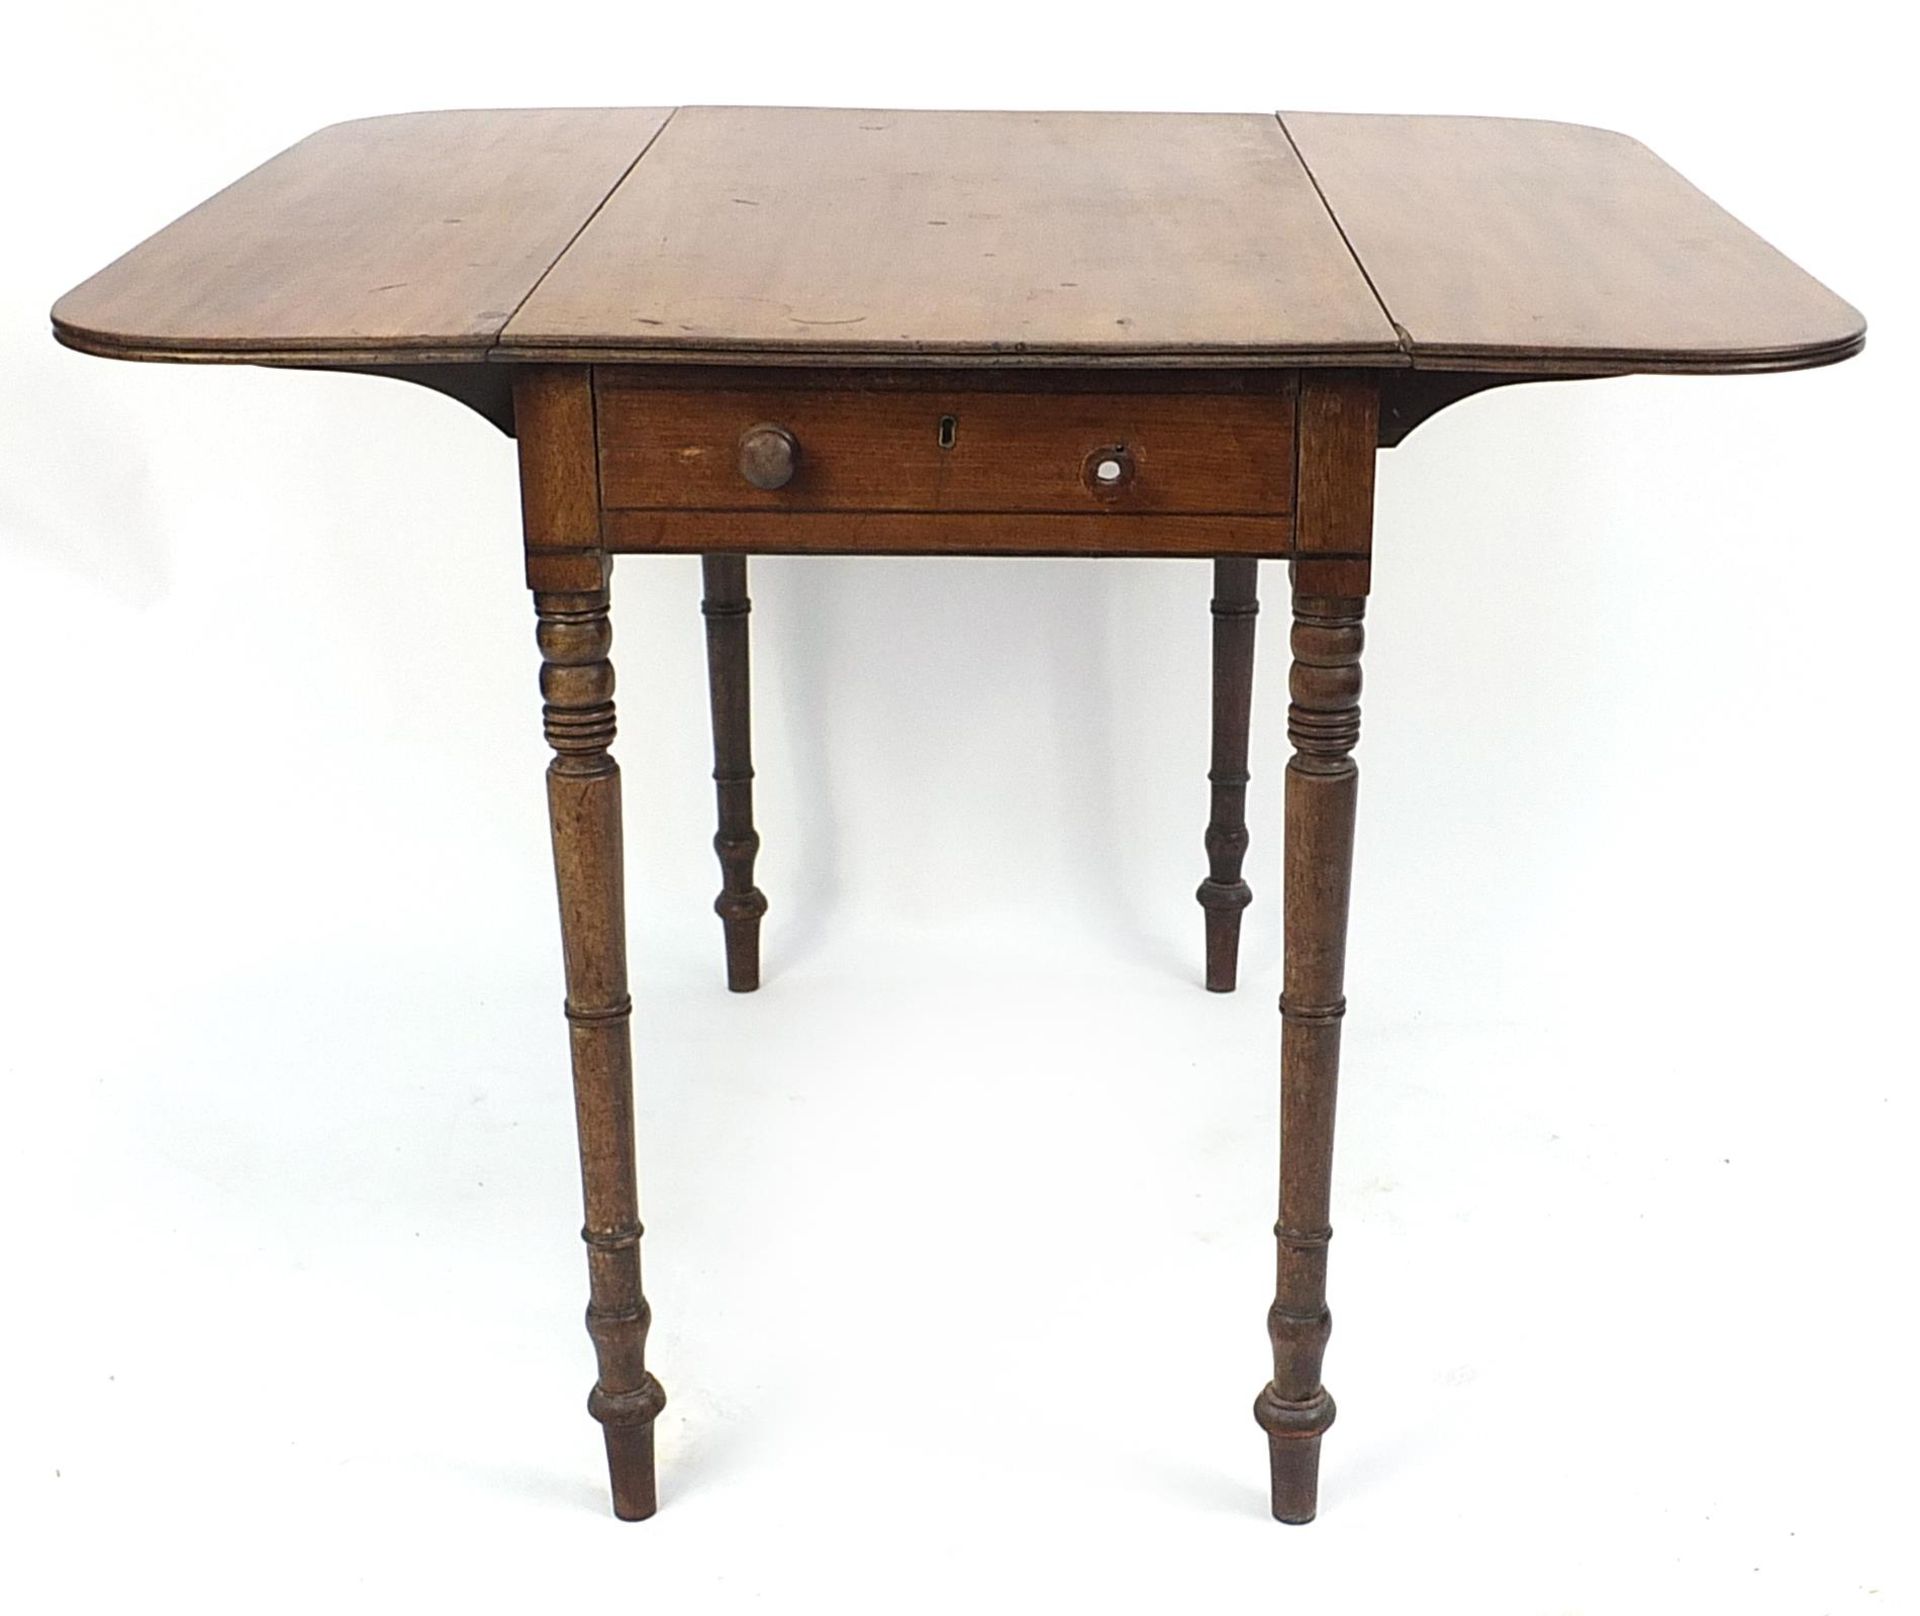 Victorian mahogany Pembroke table with drawer to the end, 72cm H x 89cm W x 49cm D - Image 3 of 4